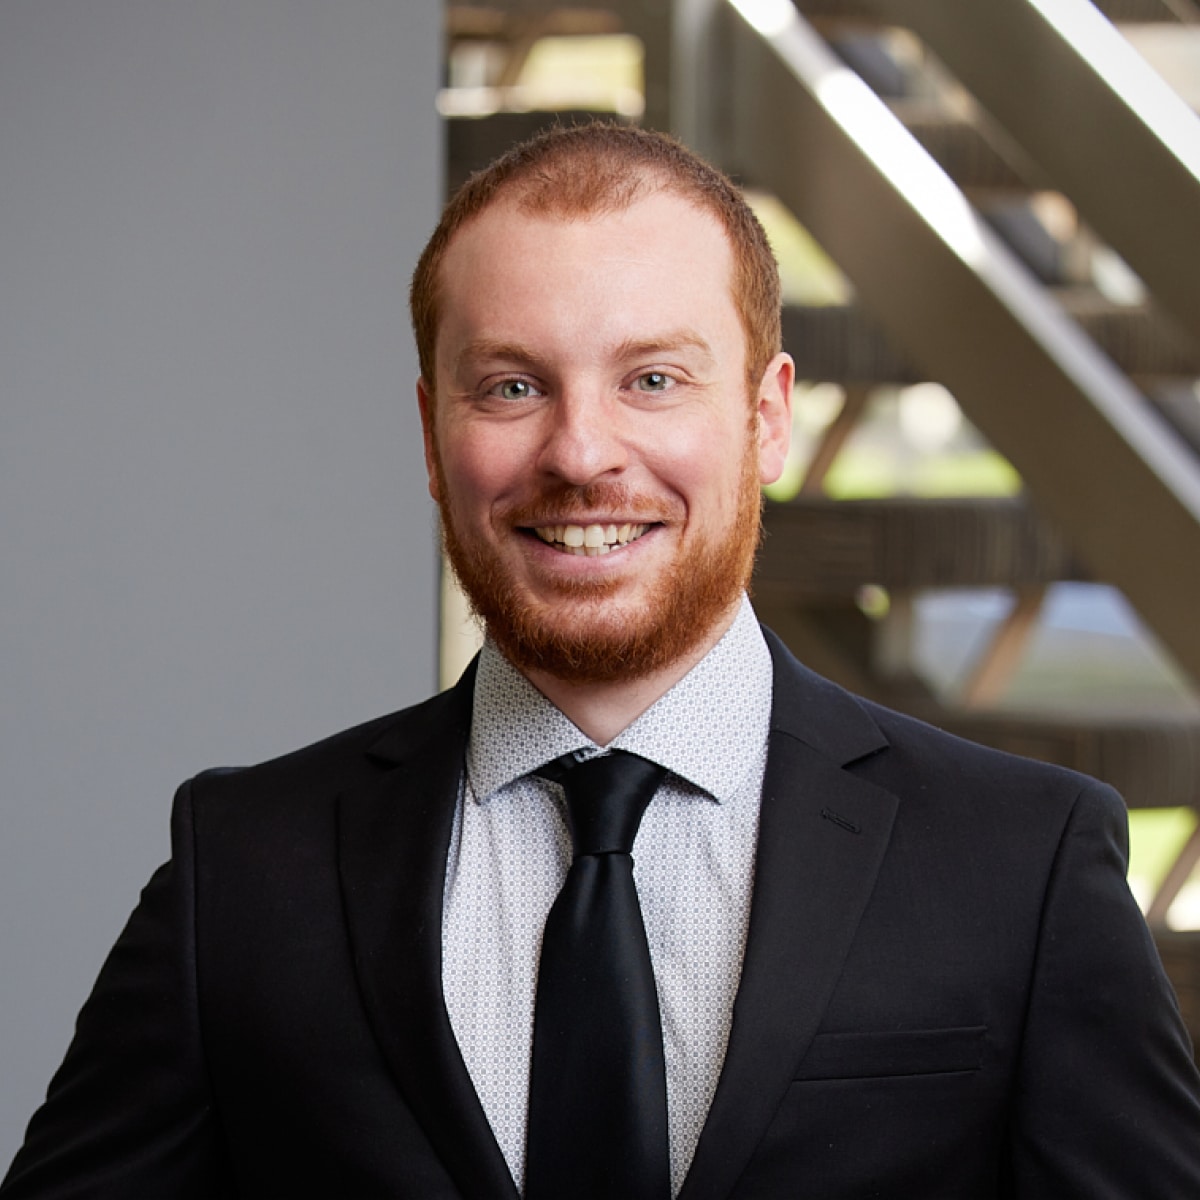 An image of Jason Gruninger CPA, Manager at Ford Keast LLP in London, ON